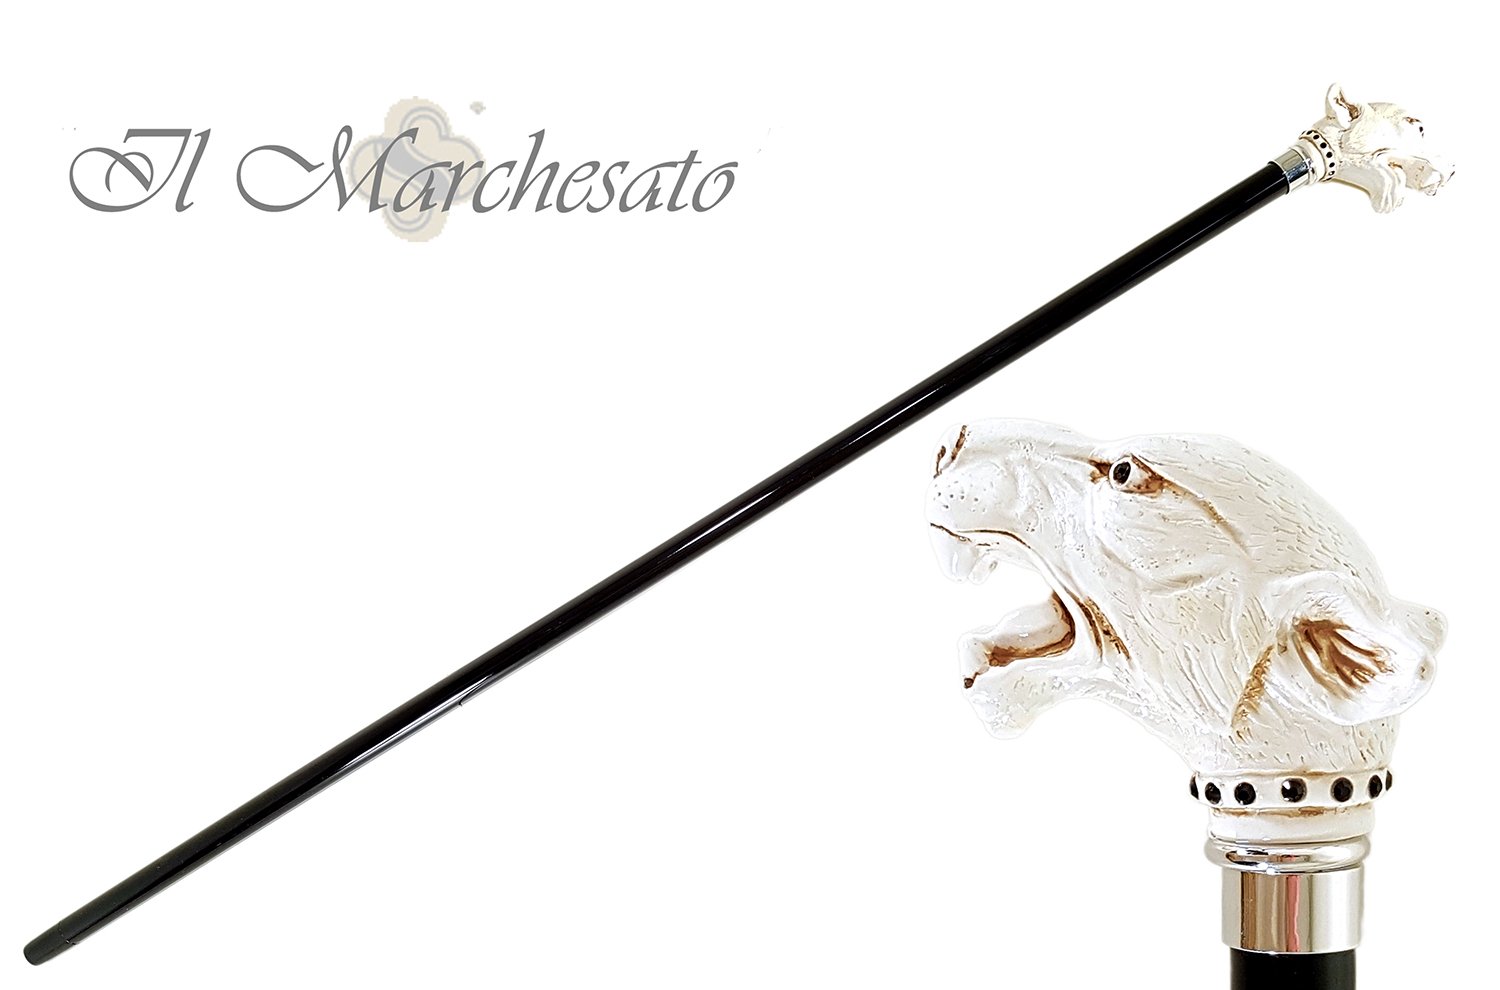 Walking Stick cane Lacquered in an Ivory Color – ilMarchesato - Luxury  Umbrellas, Canes and Shoehorns